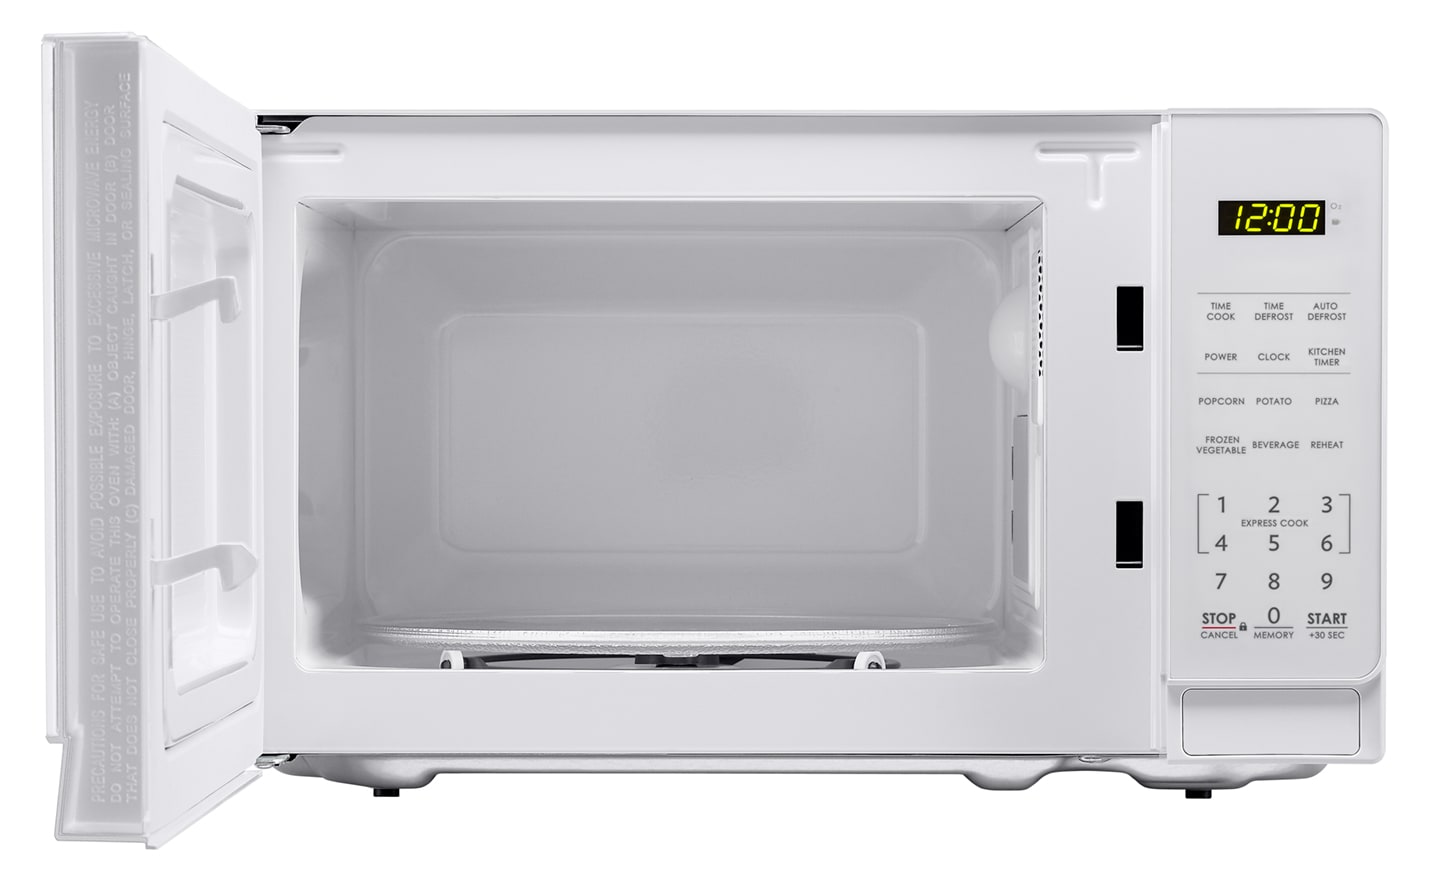 230 volt microwave for export: Muave' small microwave 17.3 w x 10.2 h x  13.deep - ideal for overseas use in boats and small kitchens.